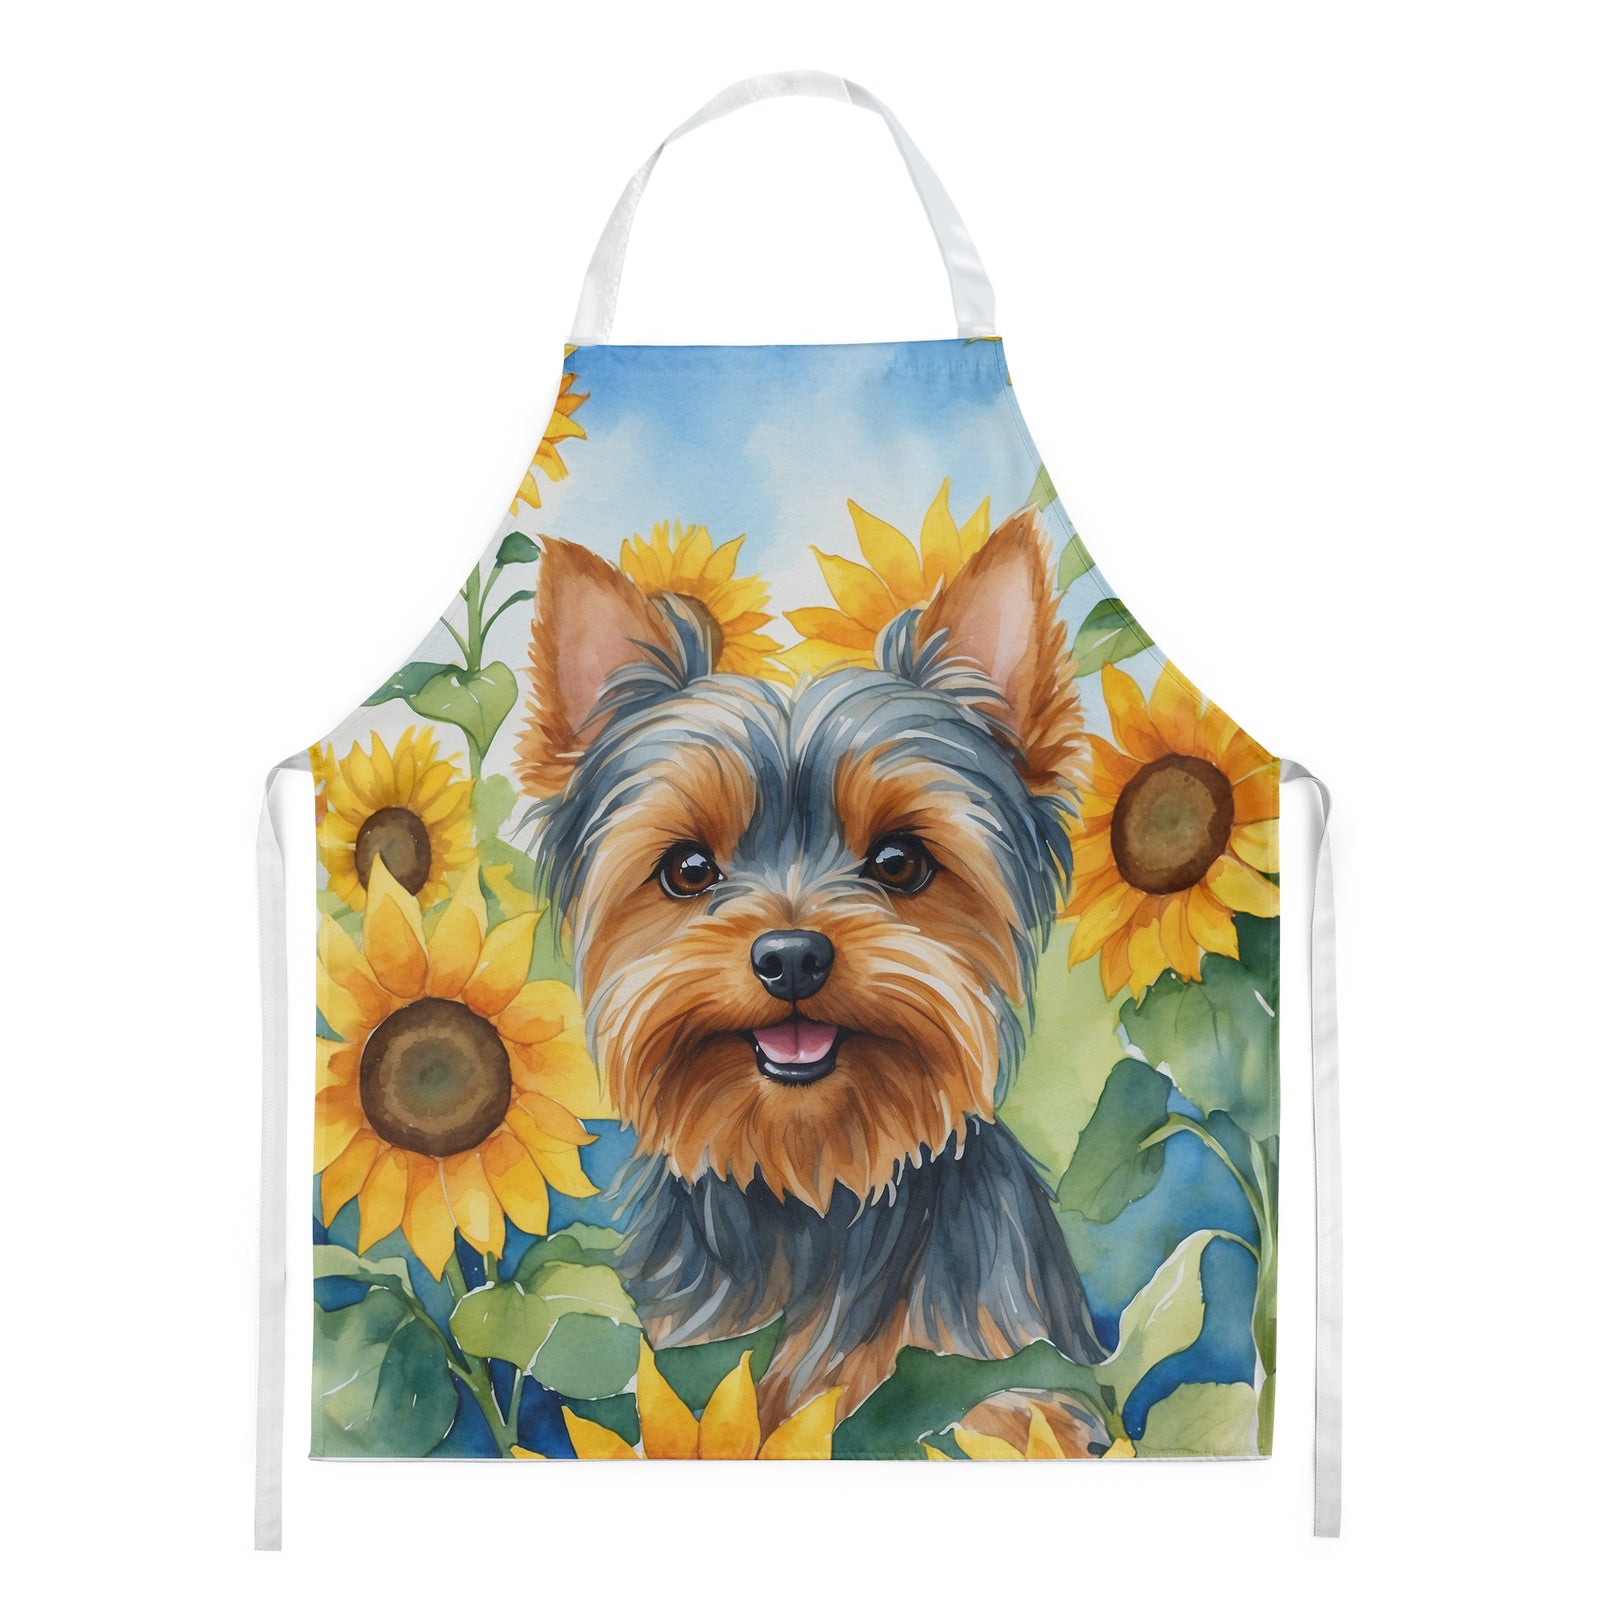 Buy this Yorkshire Terrier in Sunflowers Apron